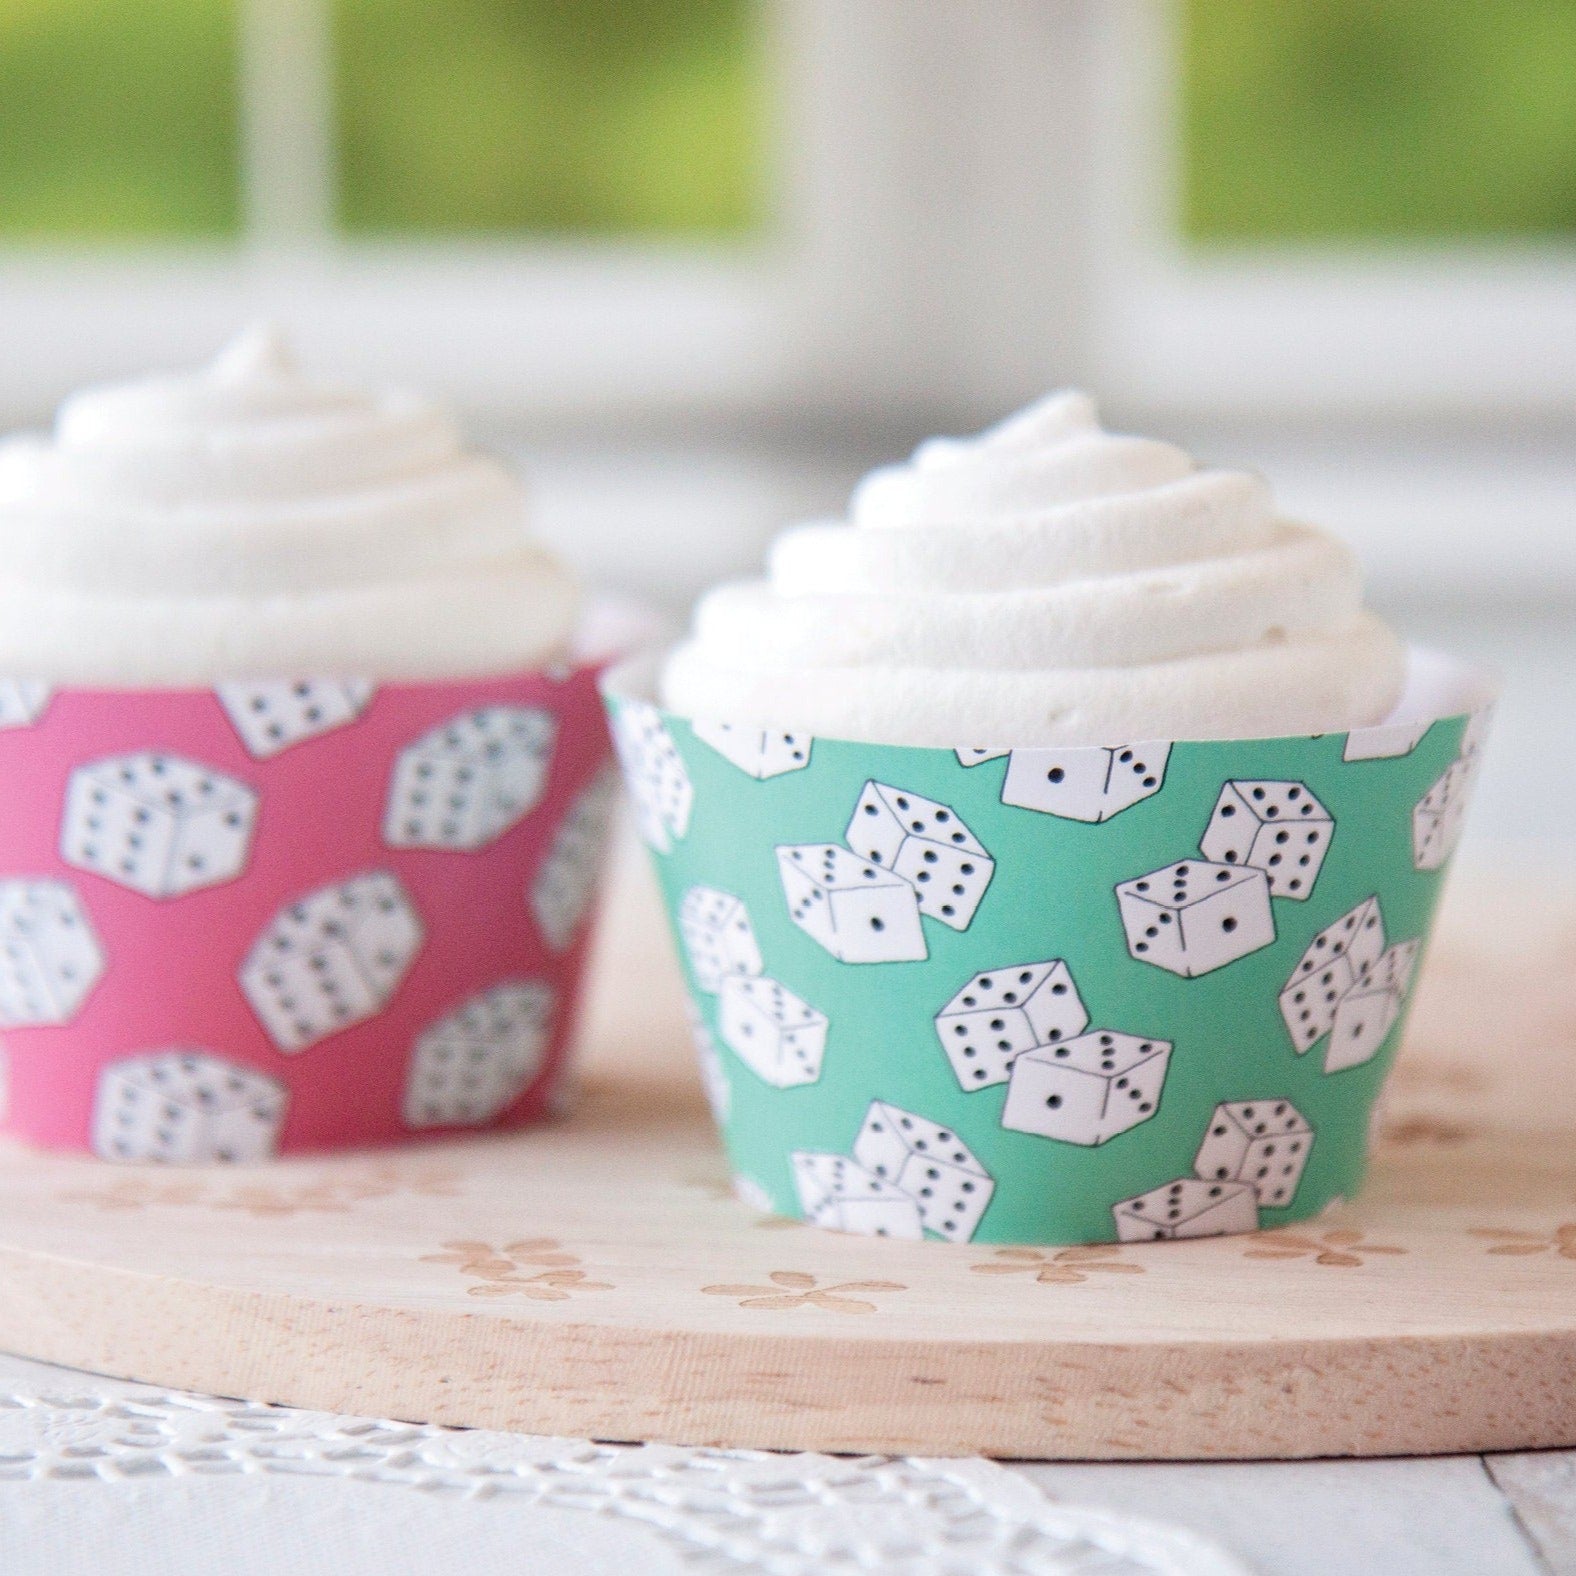 Game Dice Cupcake Wrapper Duo - PRINTABLE instant download PDF. Pink mint green with black & white dice. Bunco night dessert for game fans.